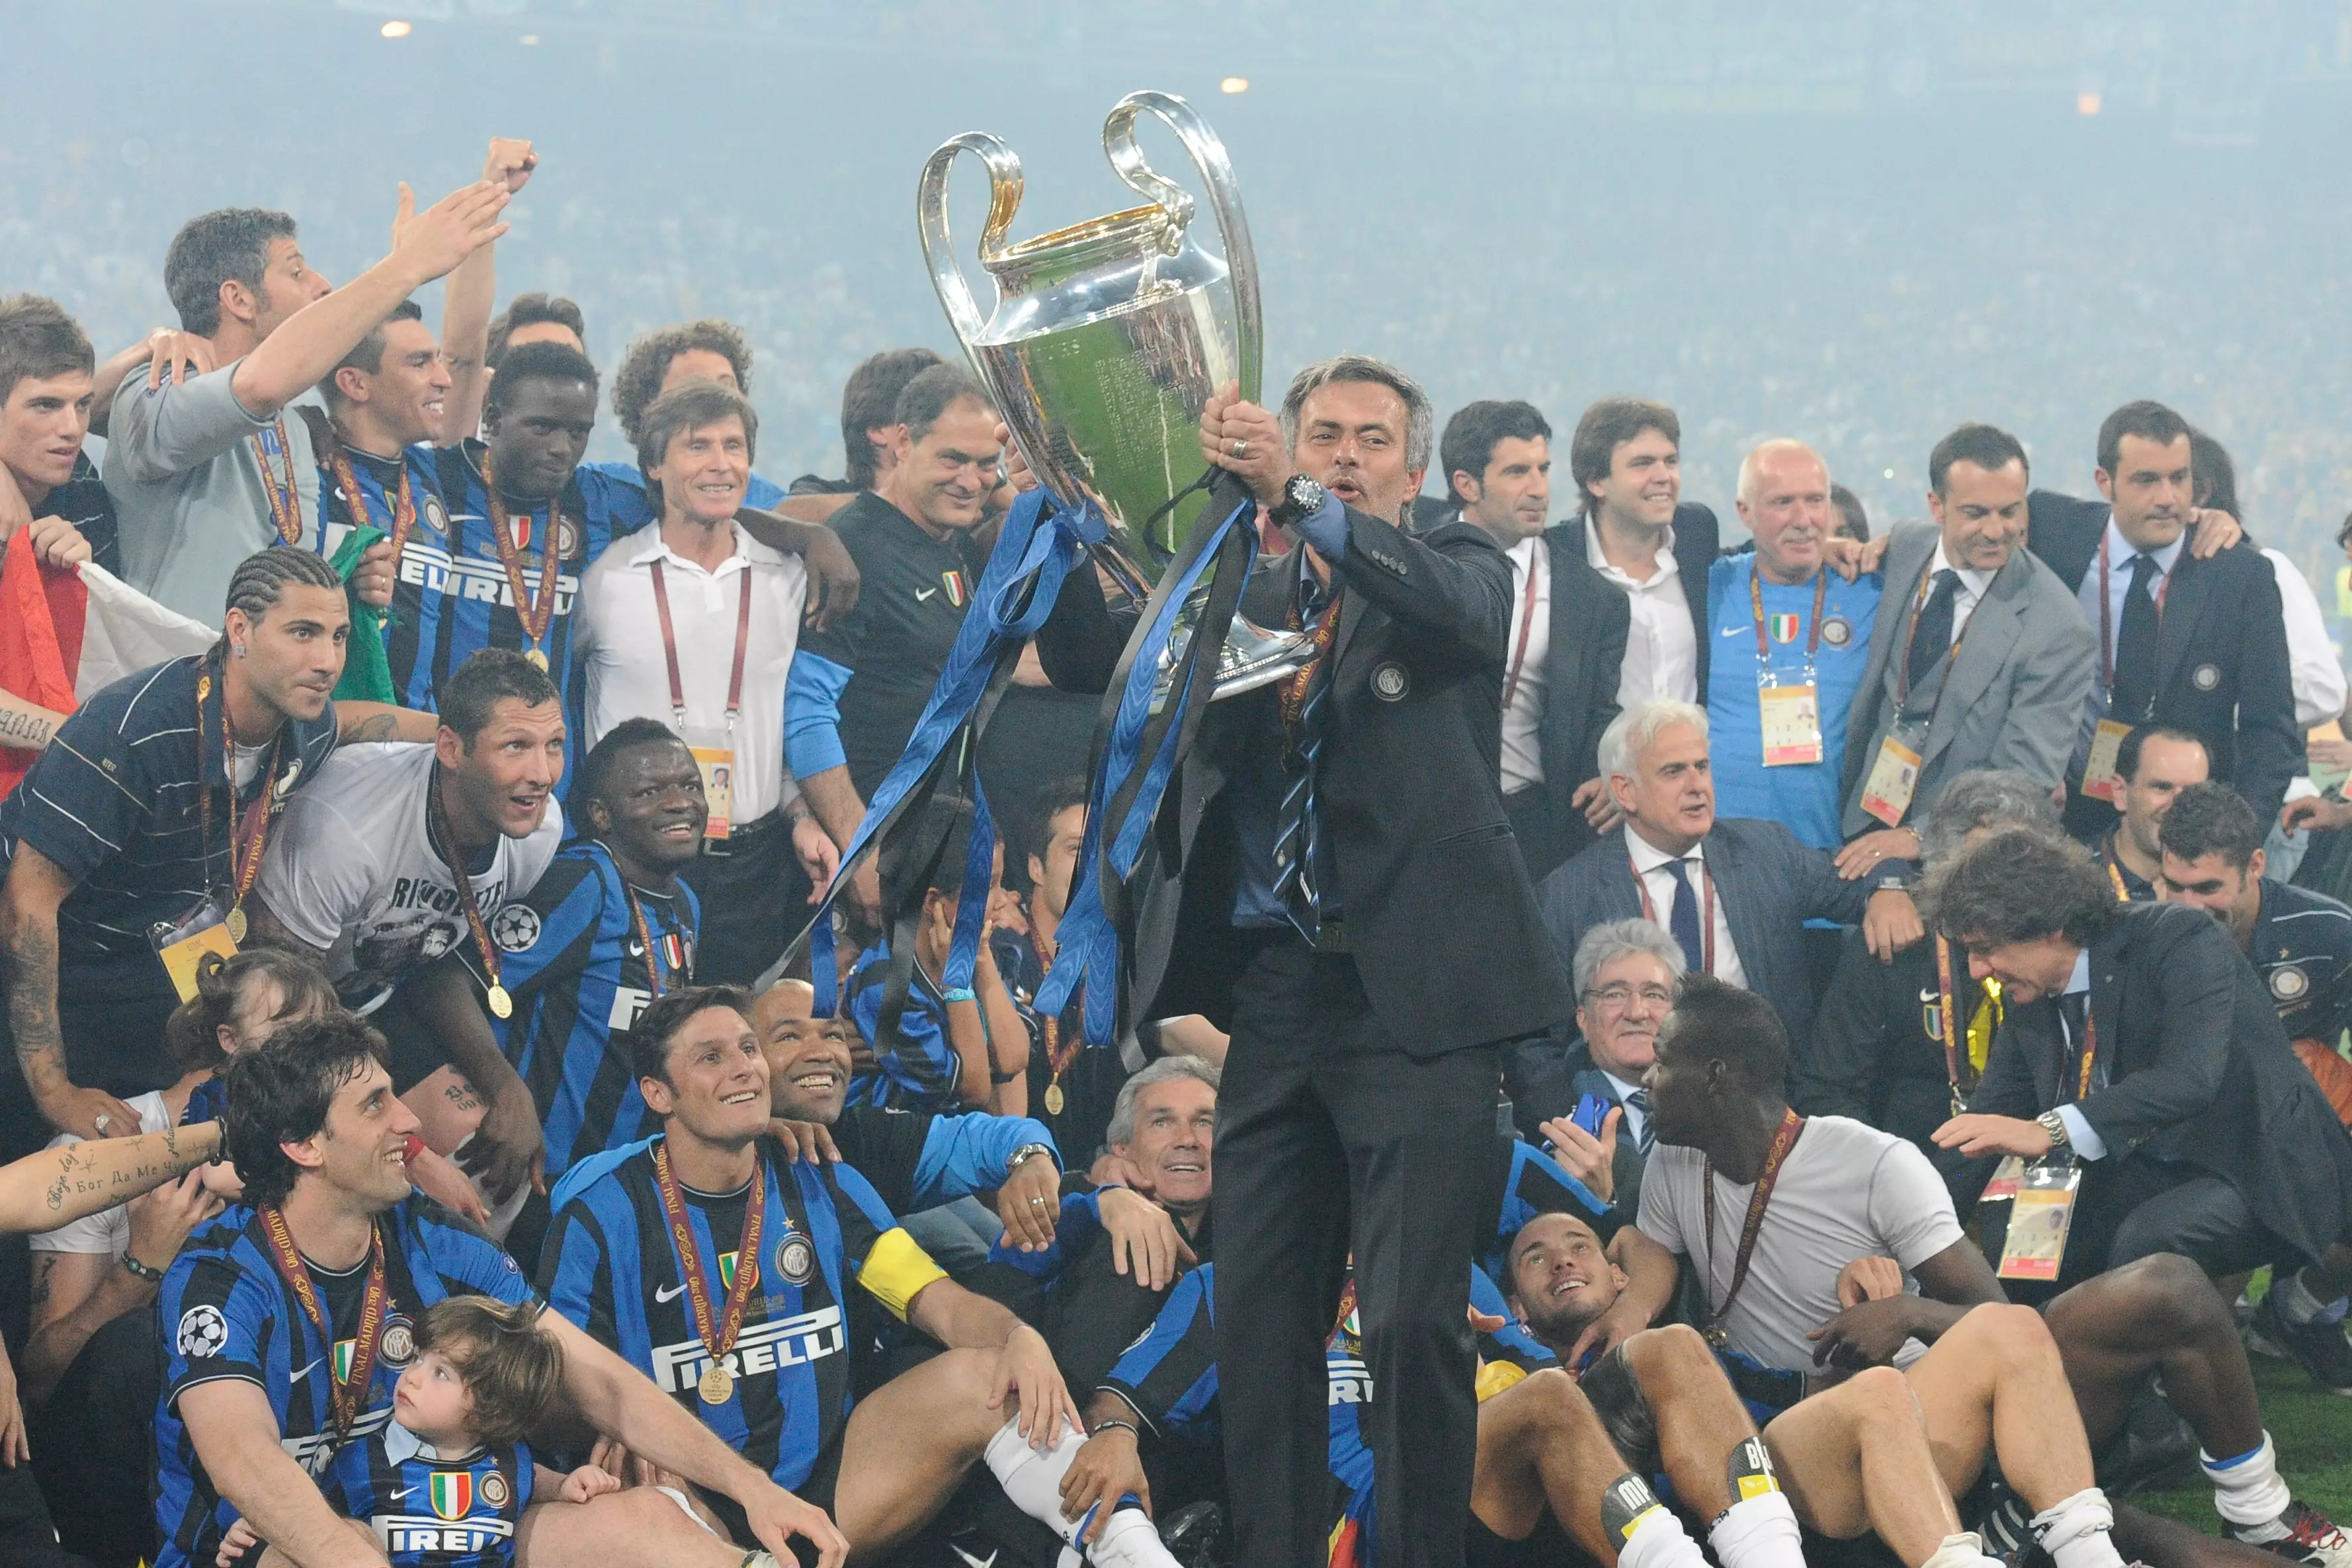 Jose Mourinho after his Inter Milan side defeated Bayern Munich in 2010. (Image